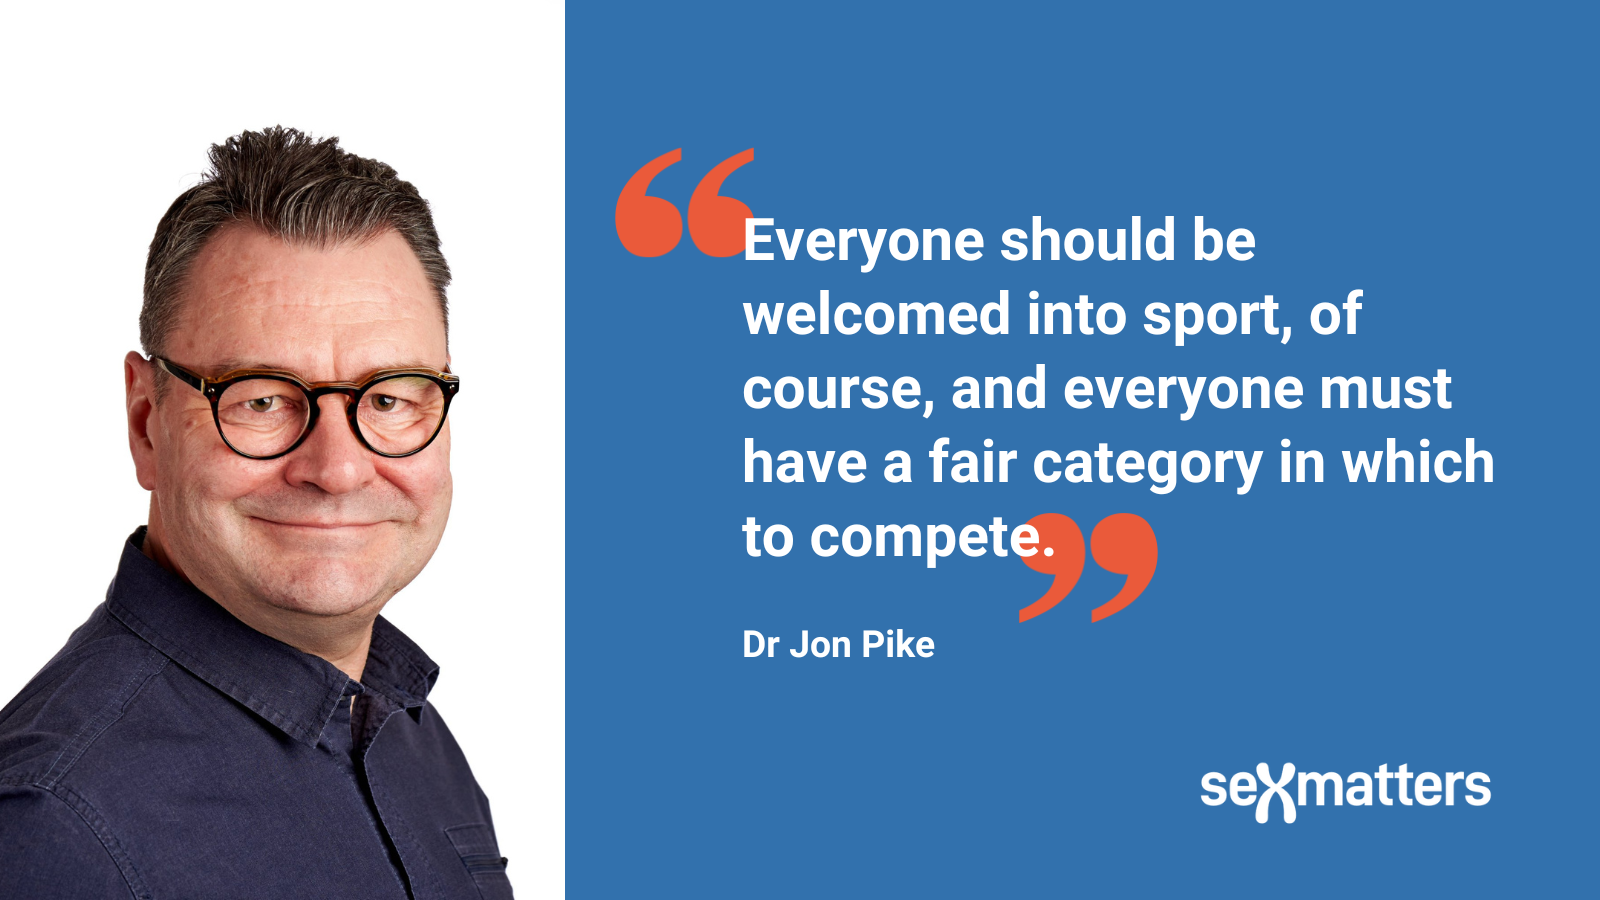 Everyone should be welcomed into sport, of course, and everyone must have a fair category in which to compete.